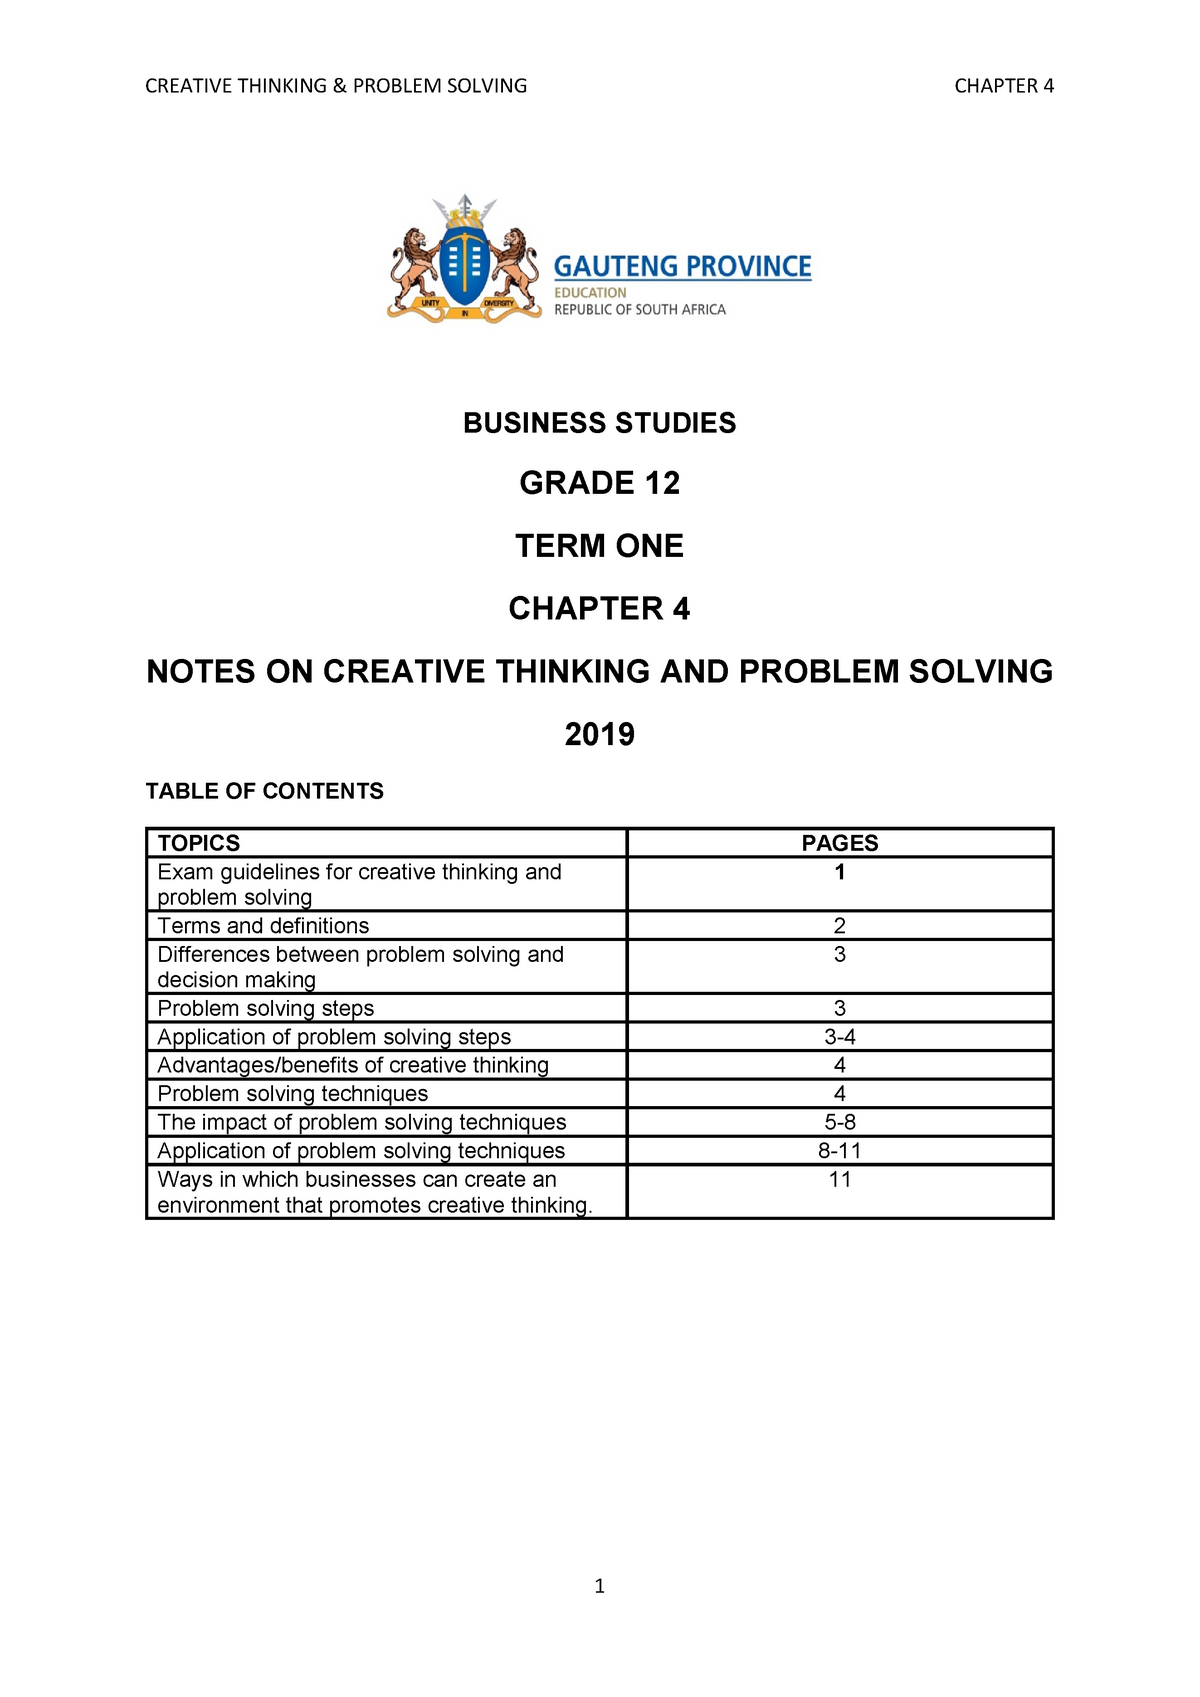 business studies creative thinking and problem solving notes